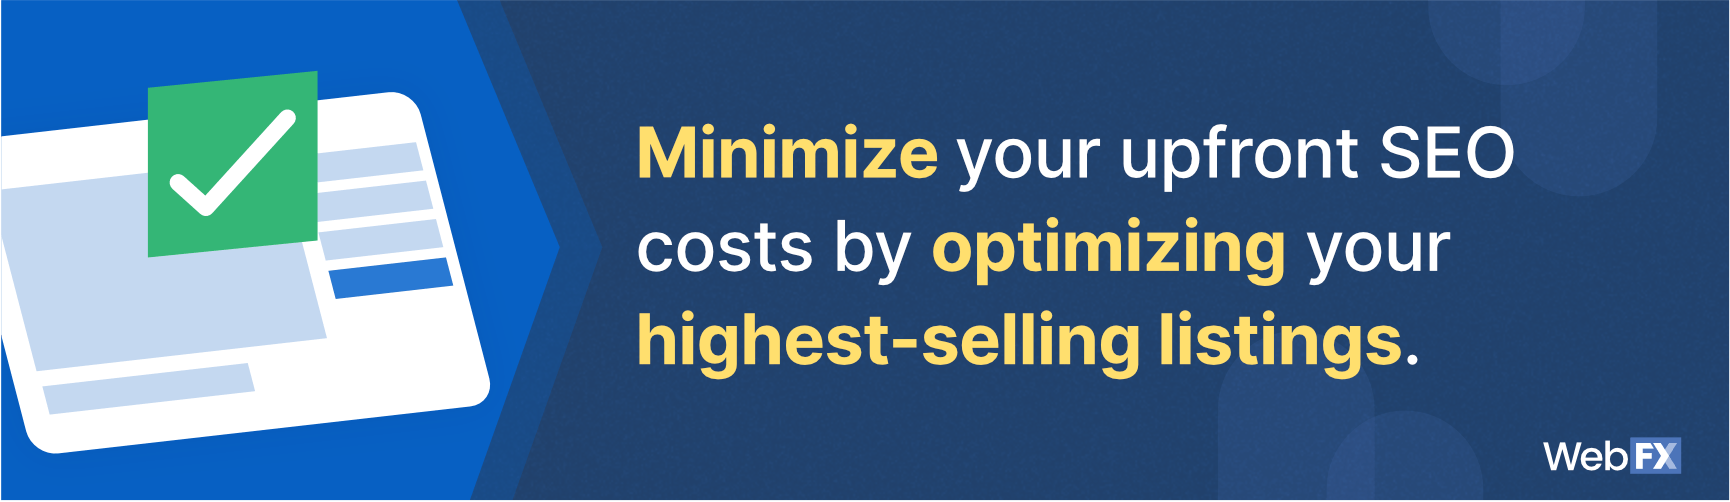 graphic about optimizing your highest-selling Amazon listings